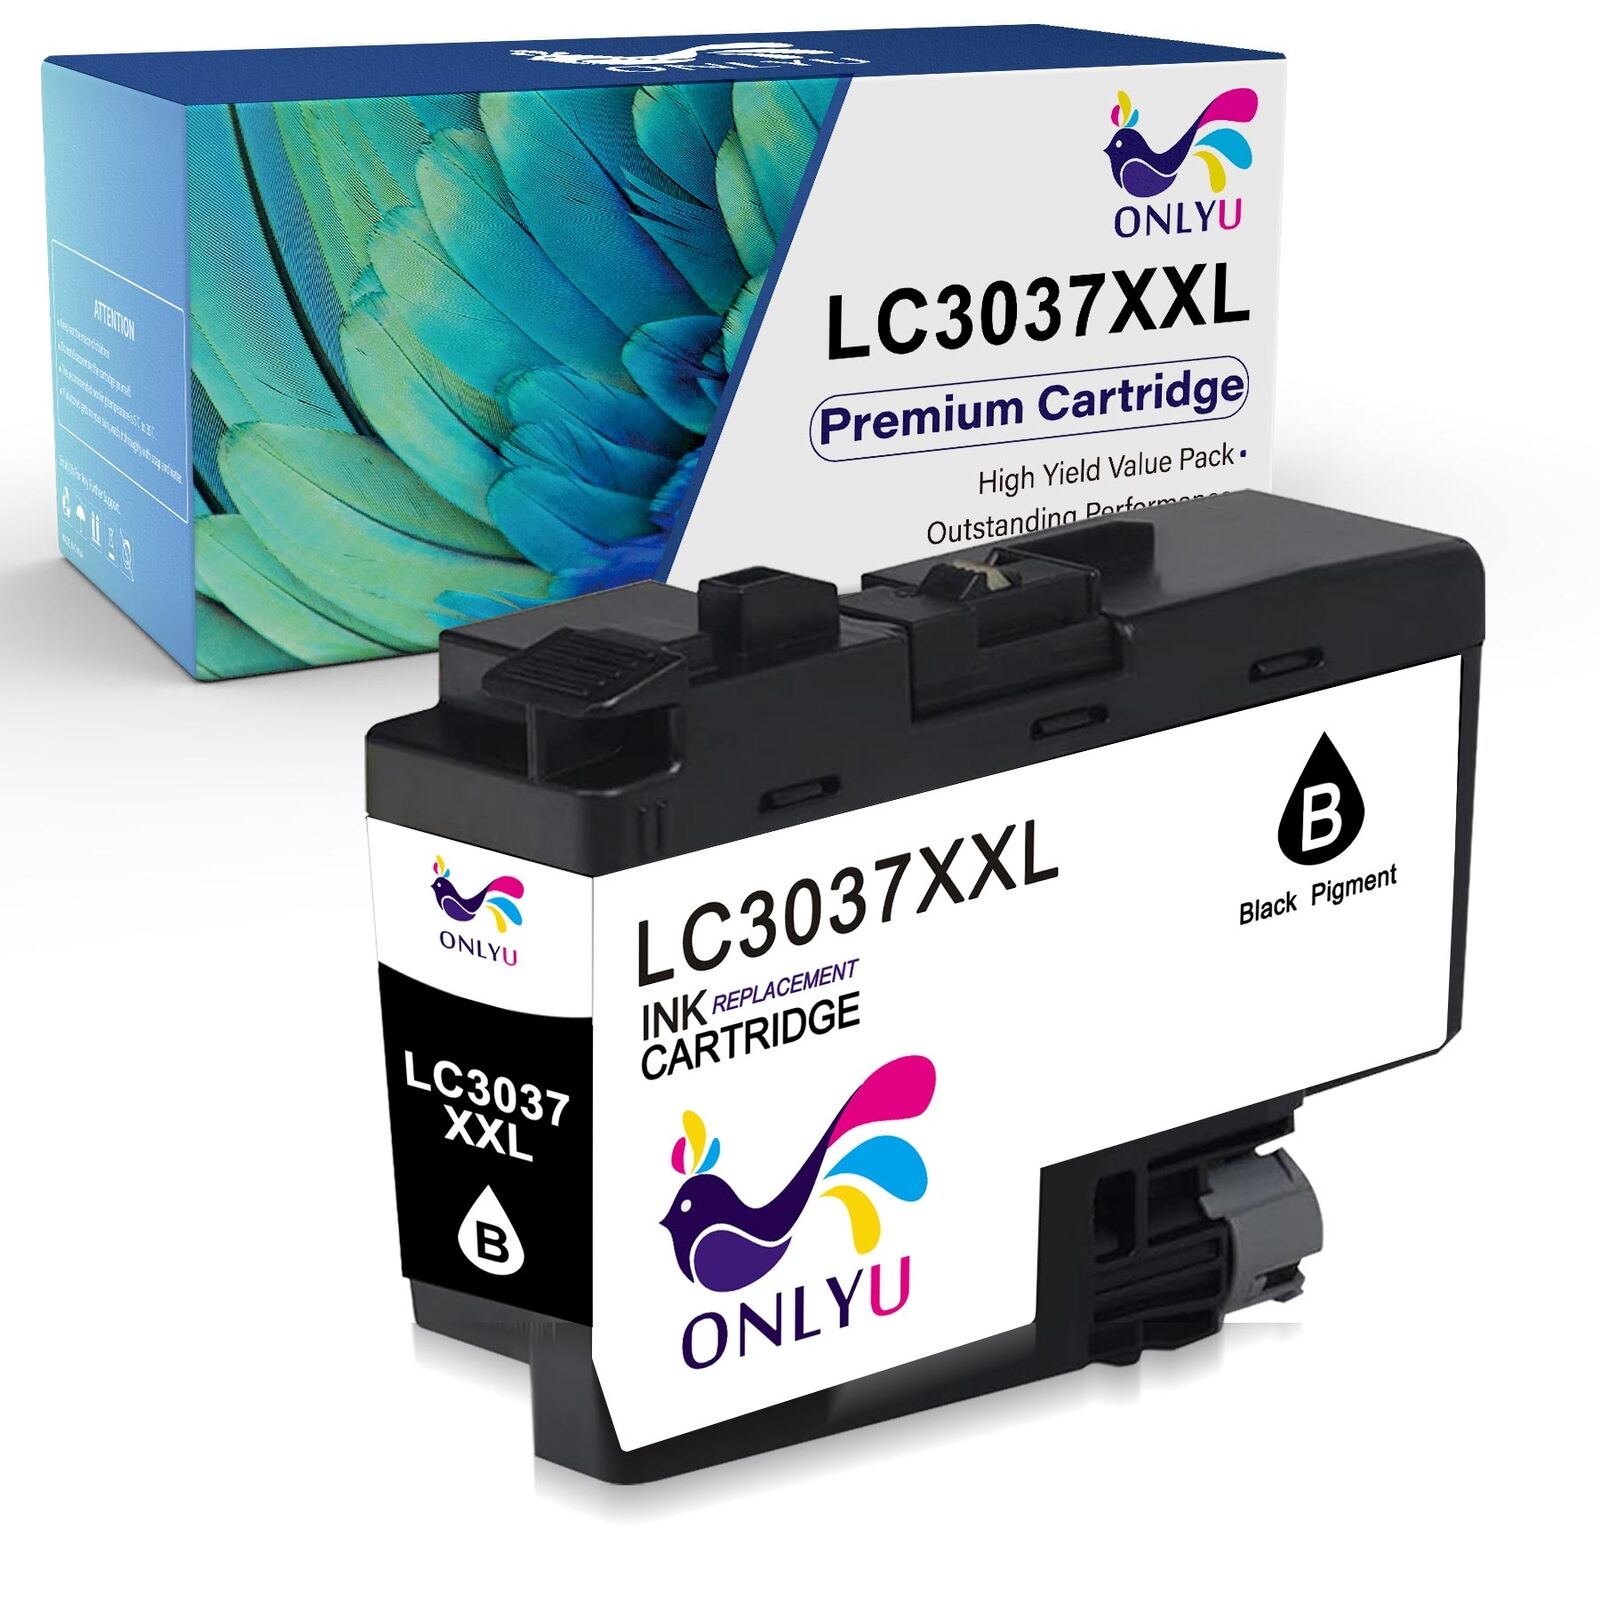 LC3037 XXL Ink Replacement for Brother MFC-J5845DW MFC-J5945DW MFCJ6545DW w/chip